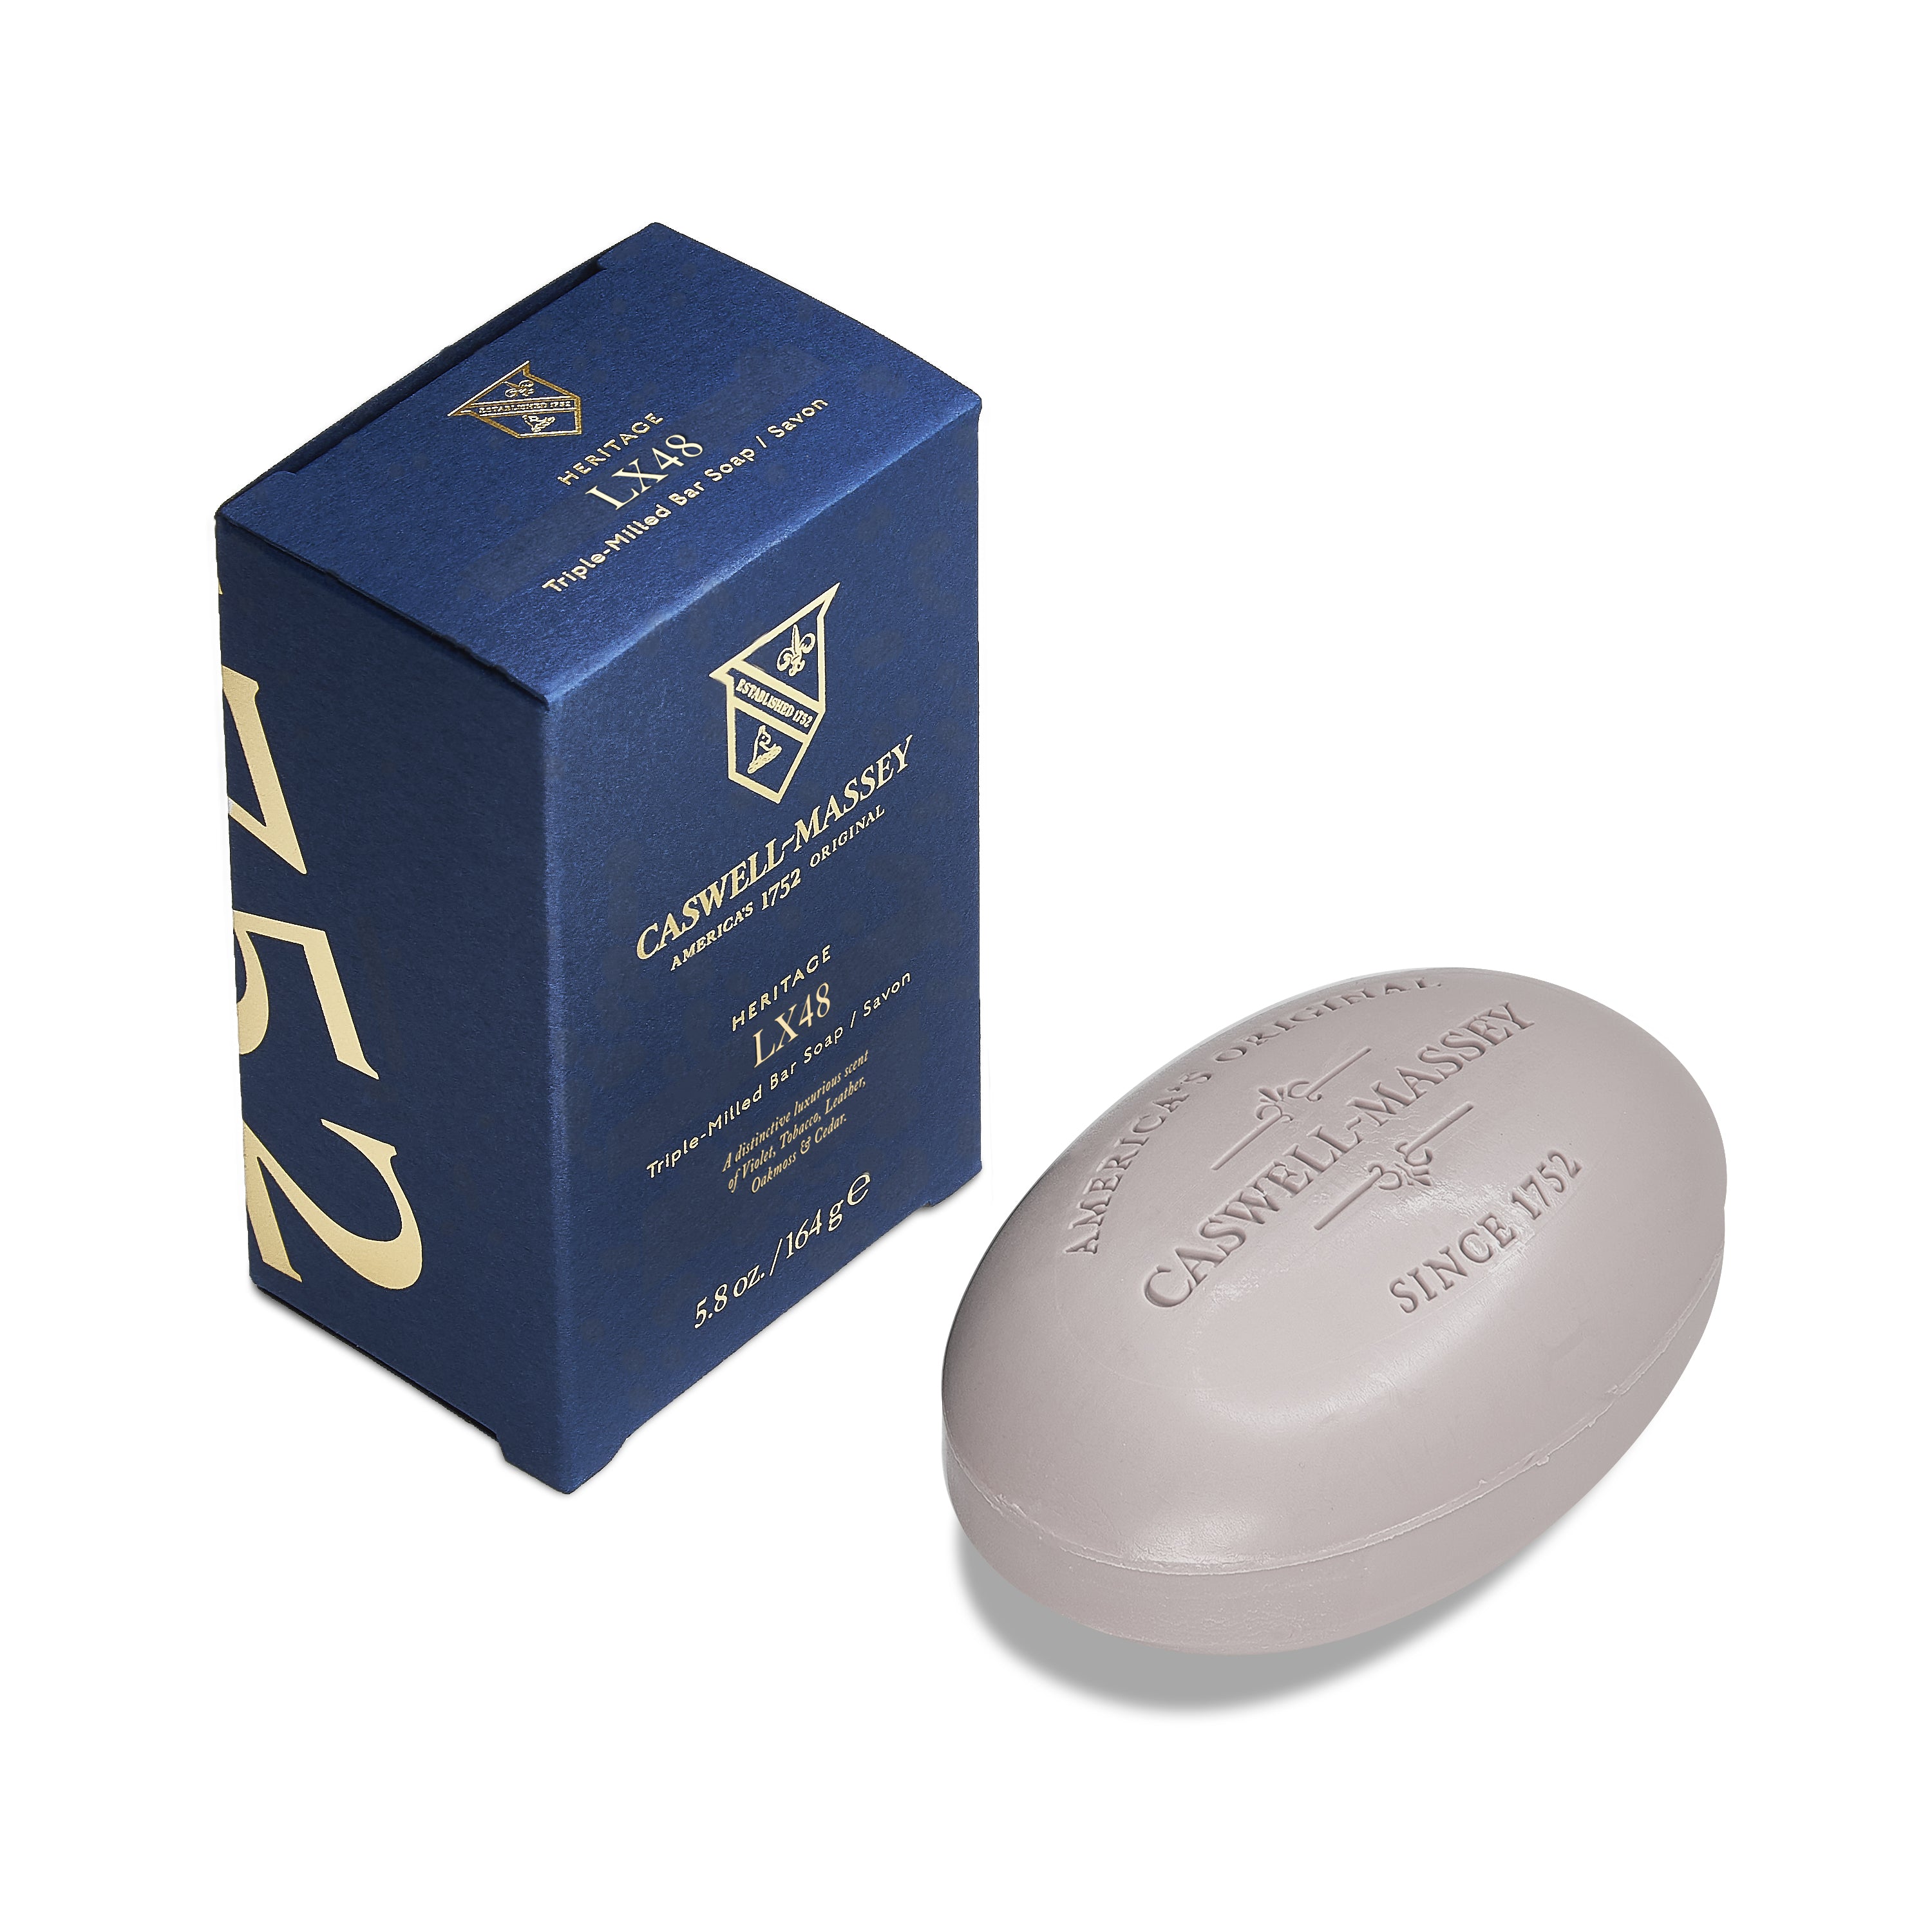 Caswell-Massey® LX48 Bar Soap shown with navy blue outer box